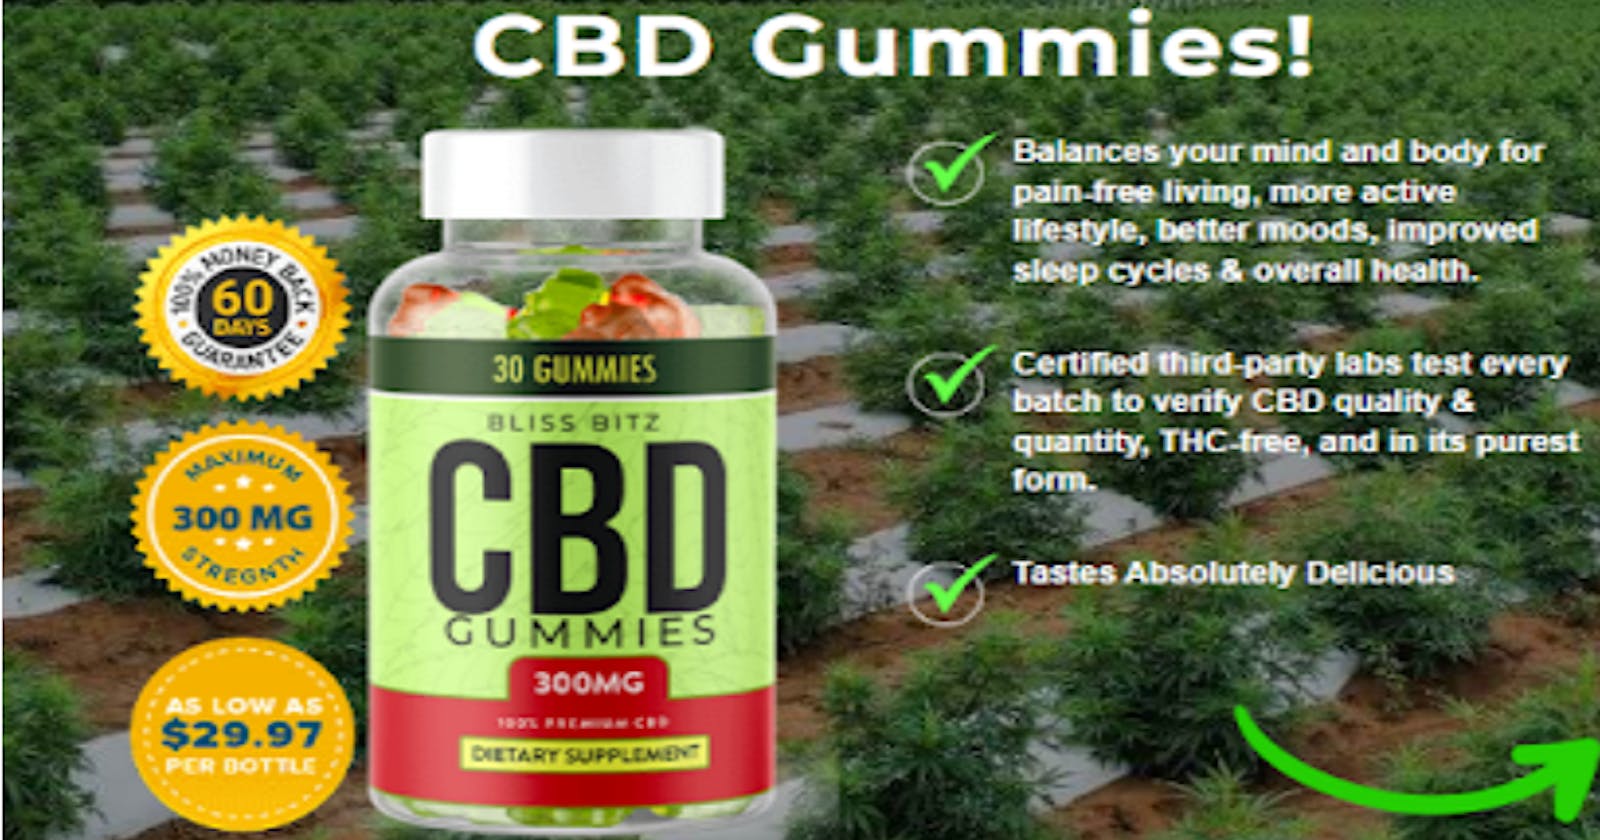 Bliss Blitz CBD Gummies Canada
 [is fake or Real?] Read About 100% Natural Product?